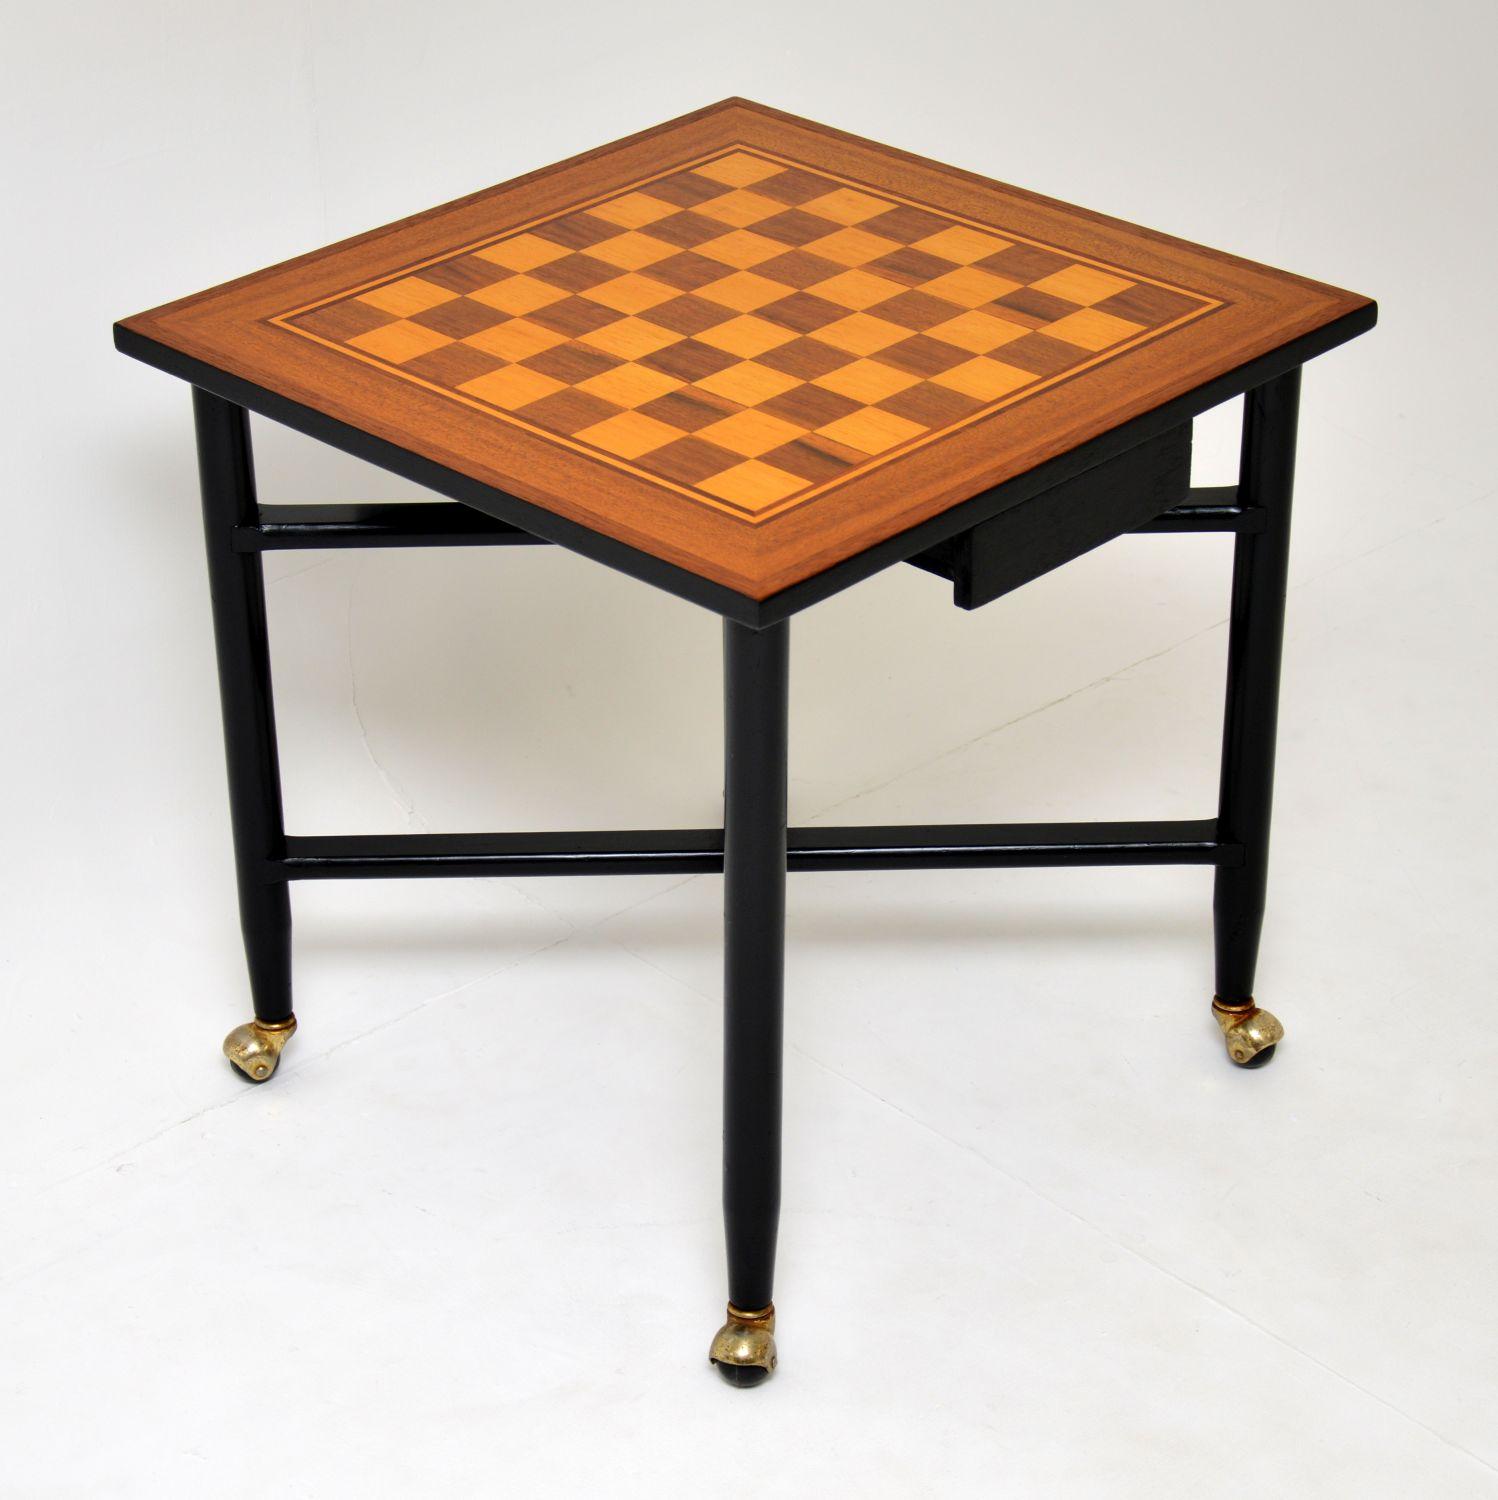 British 1960s Vintage Games / Chess Table